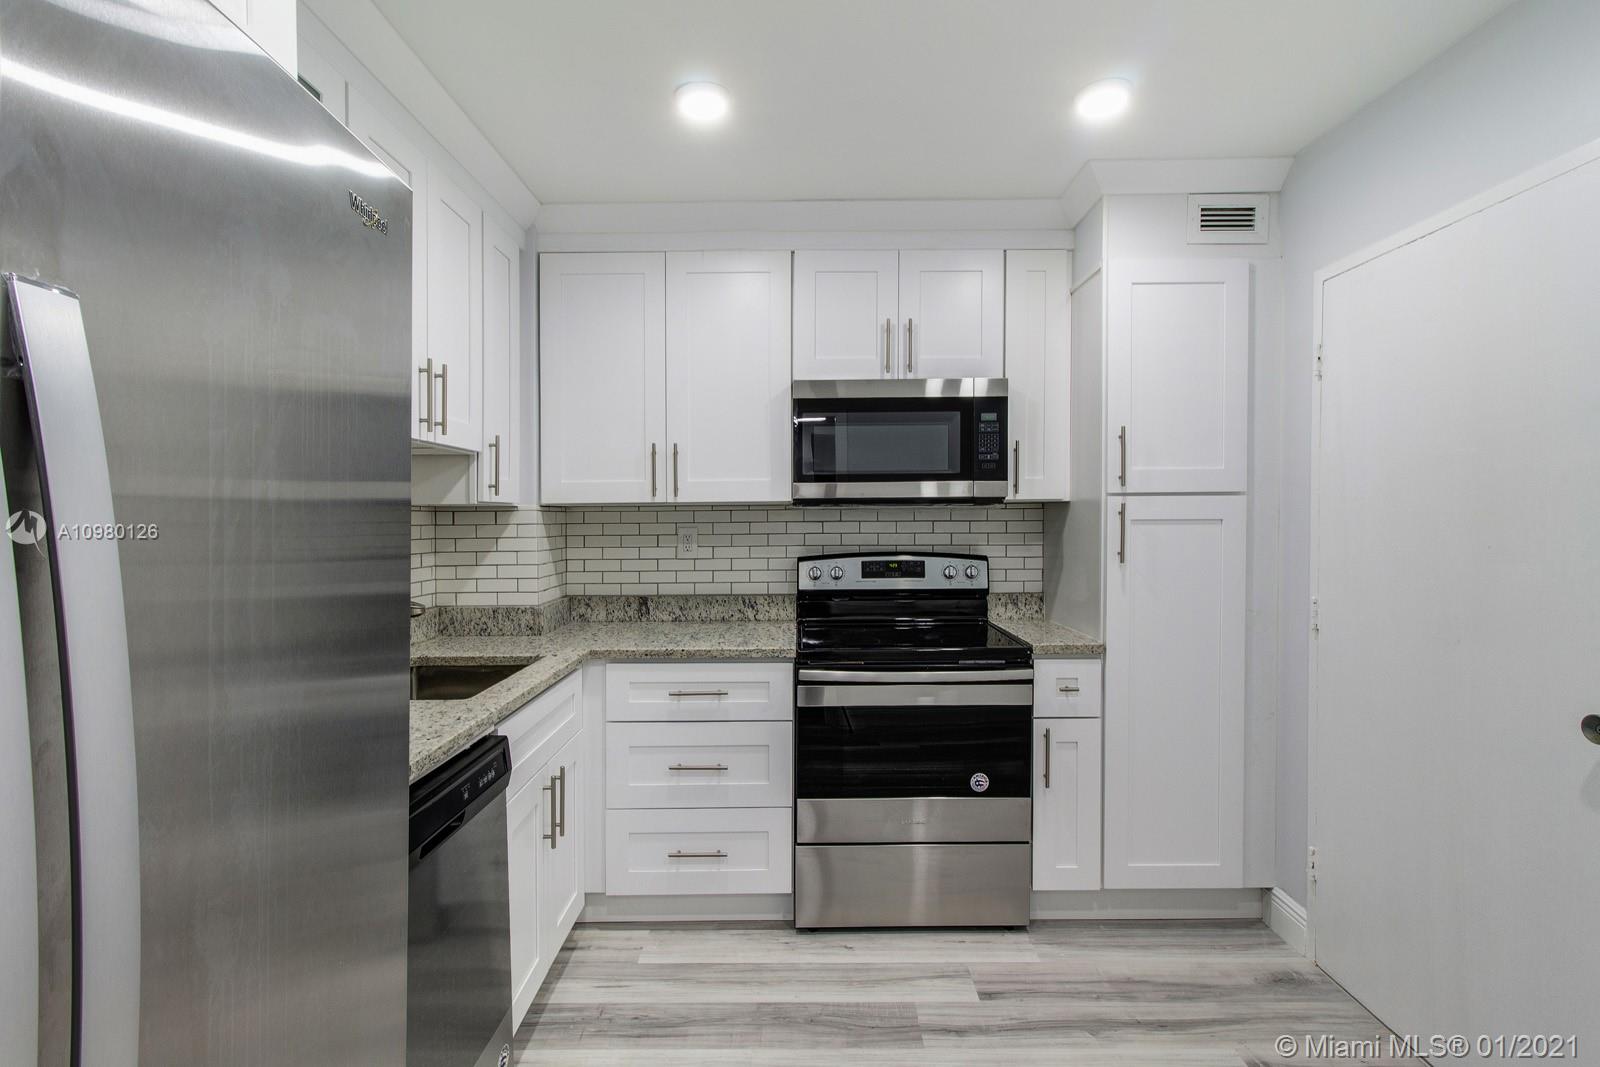 Newly designed kitchen features white cabinets, granite countertops, subway tile backsplash and stainless steel appliances.